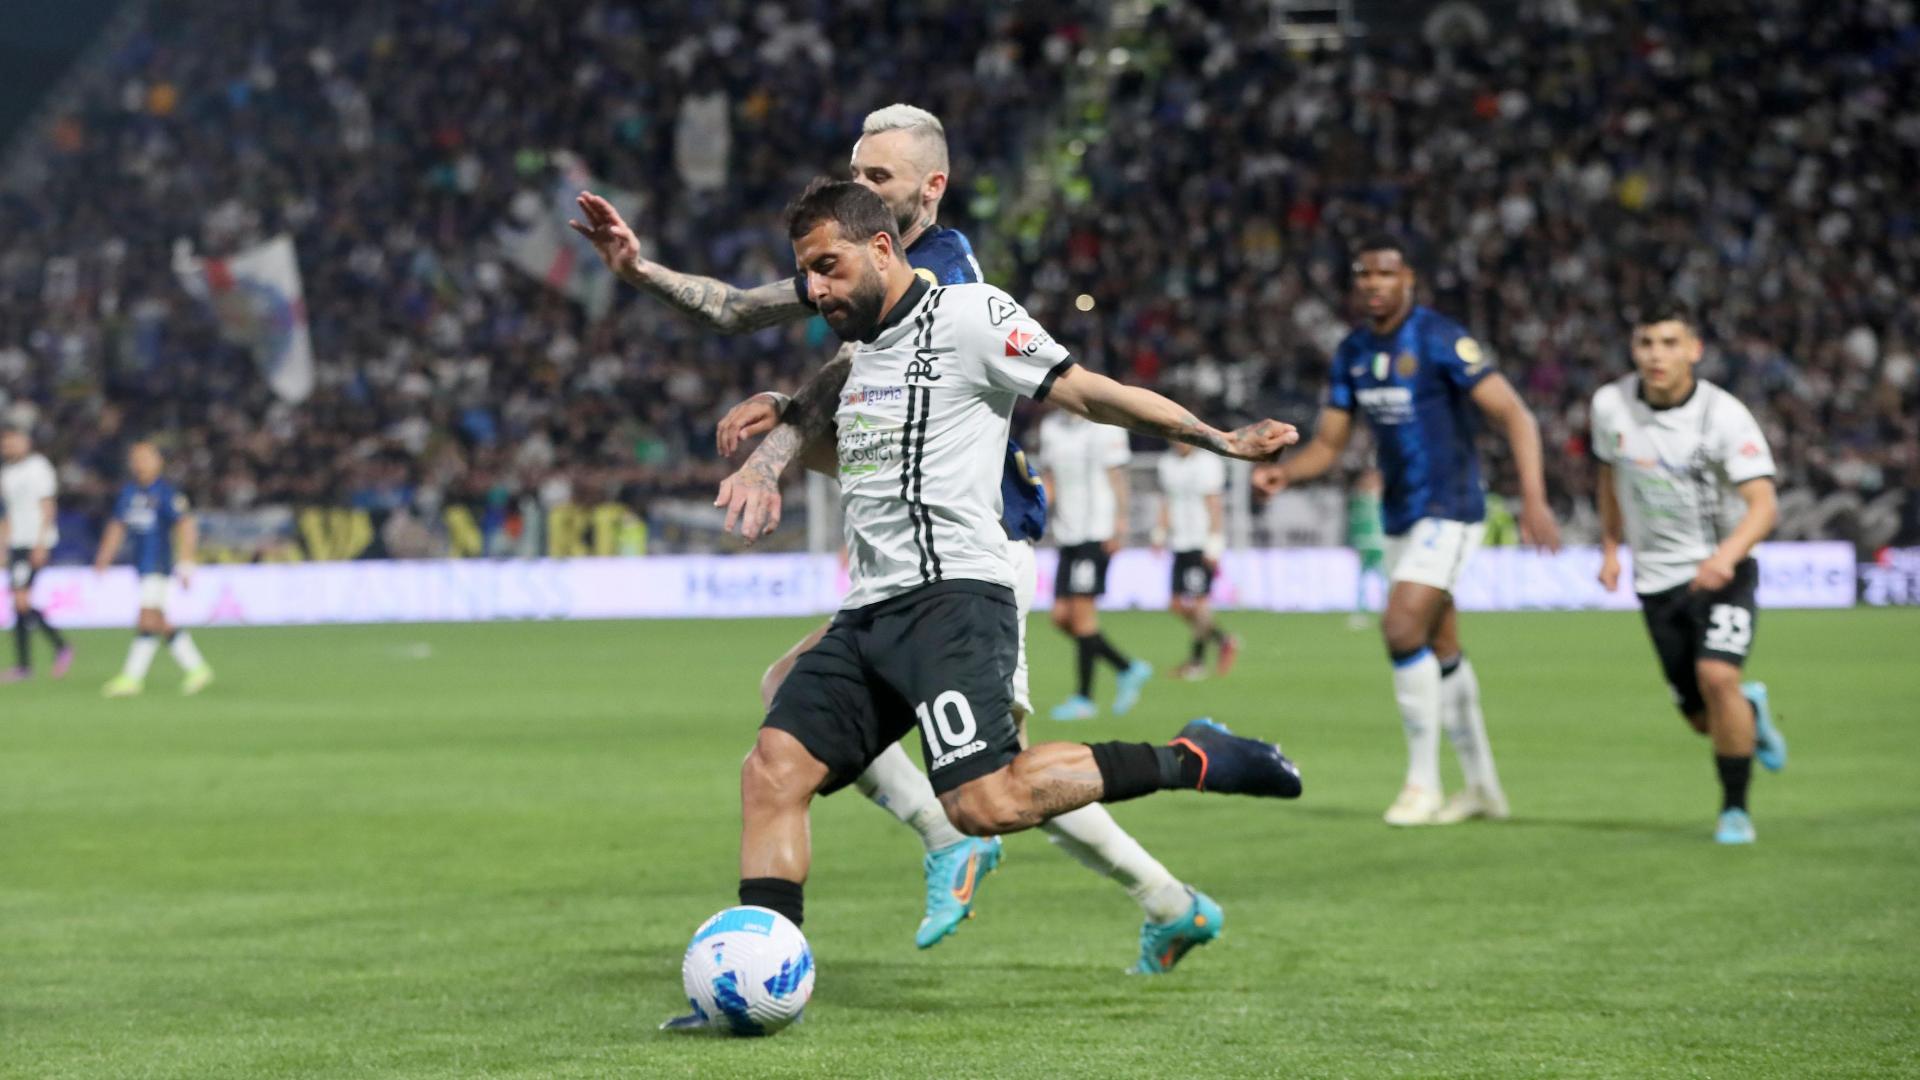 SPEZIA - INTER 1-3: the highlights